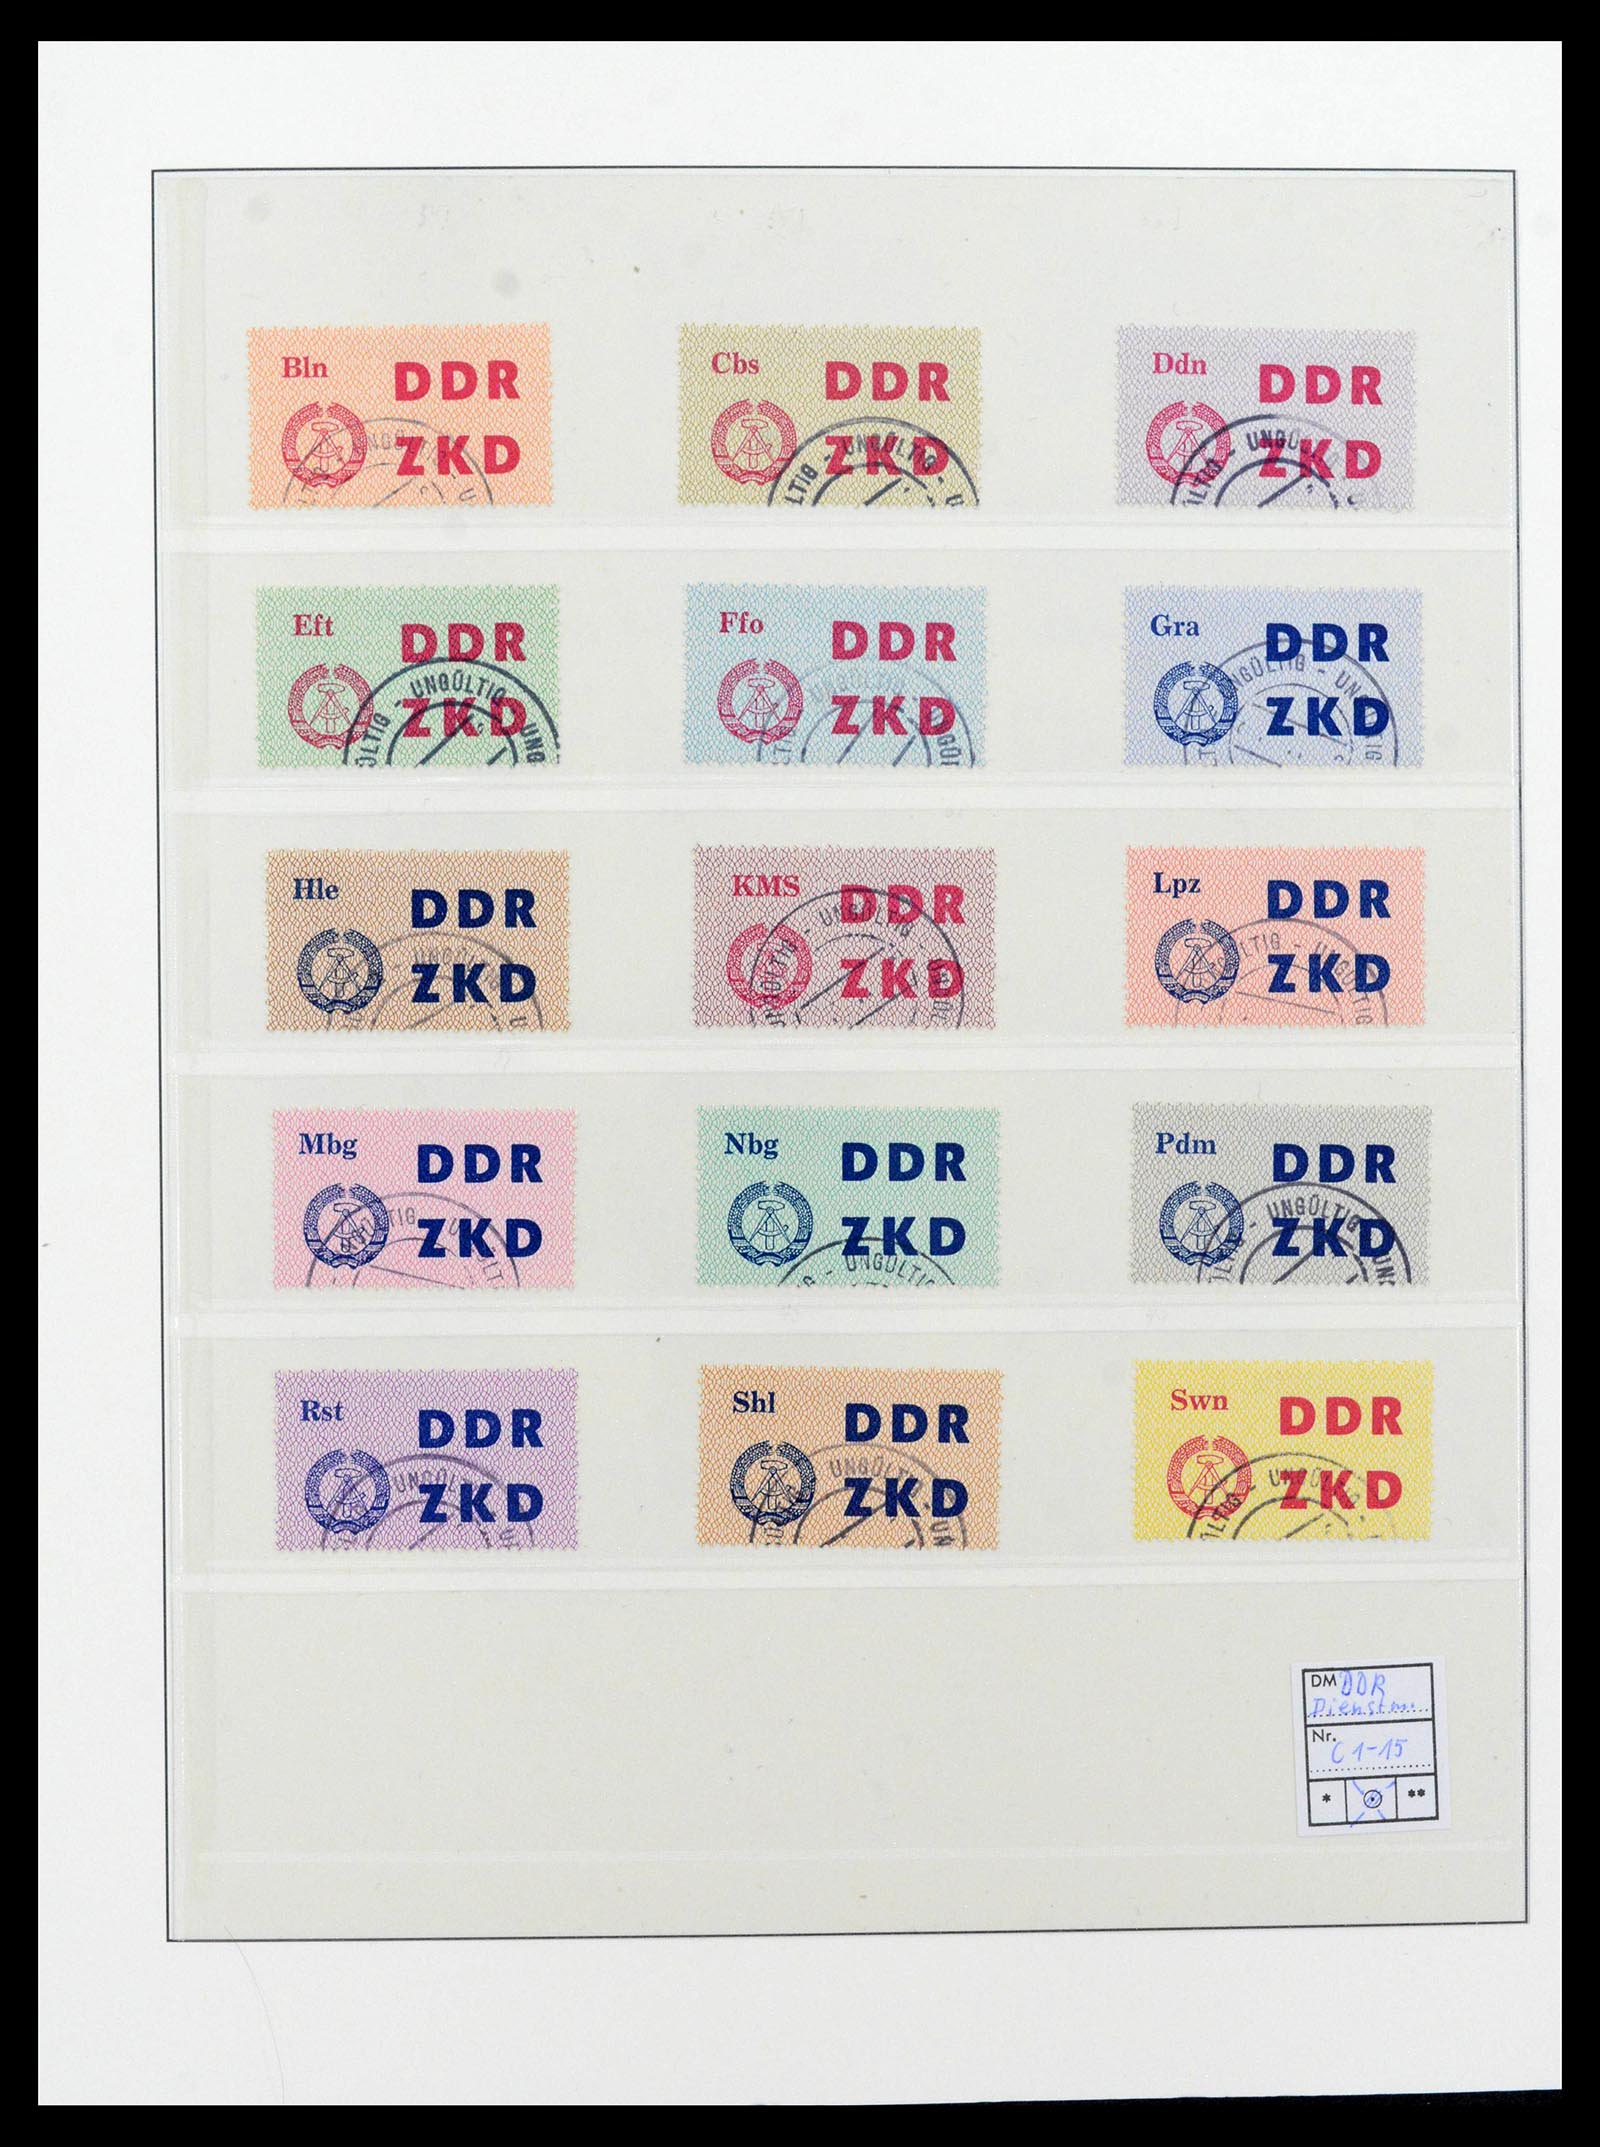 39376 0032 - Stamp collection 39376 GDR service stamps 1951-1965.